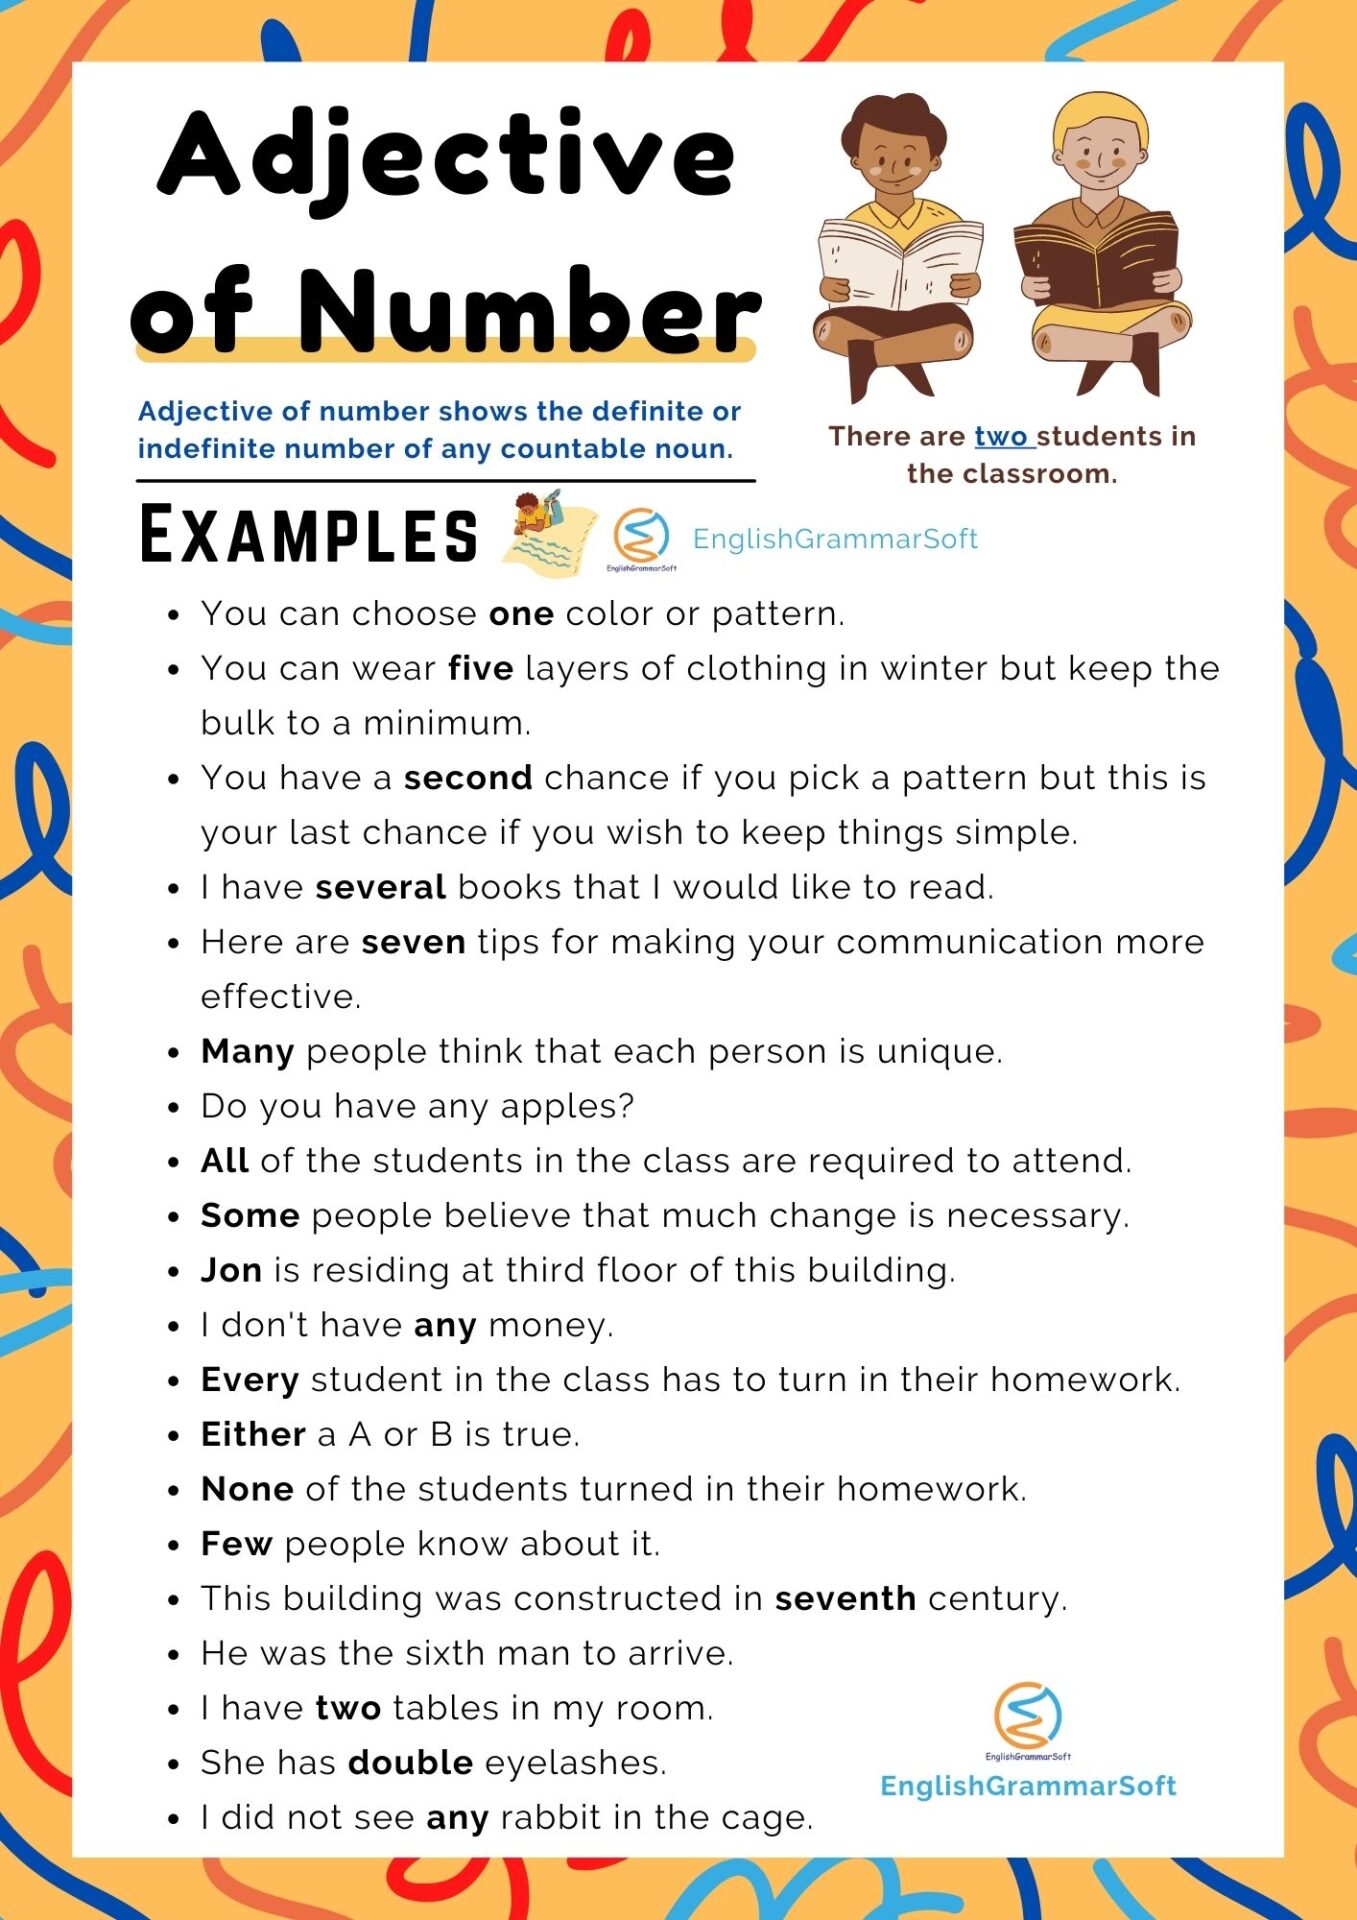 Adjective of Number Examples